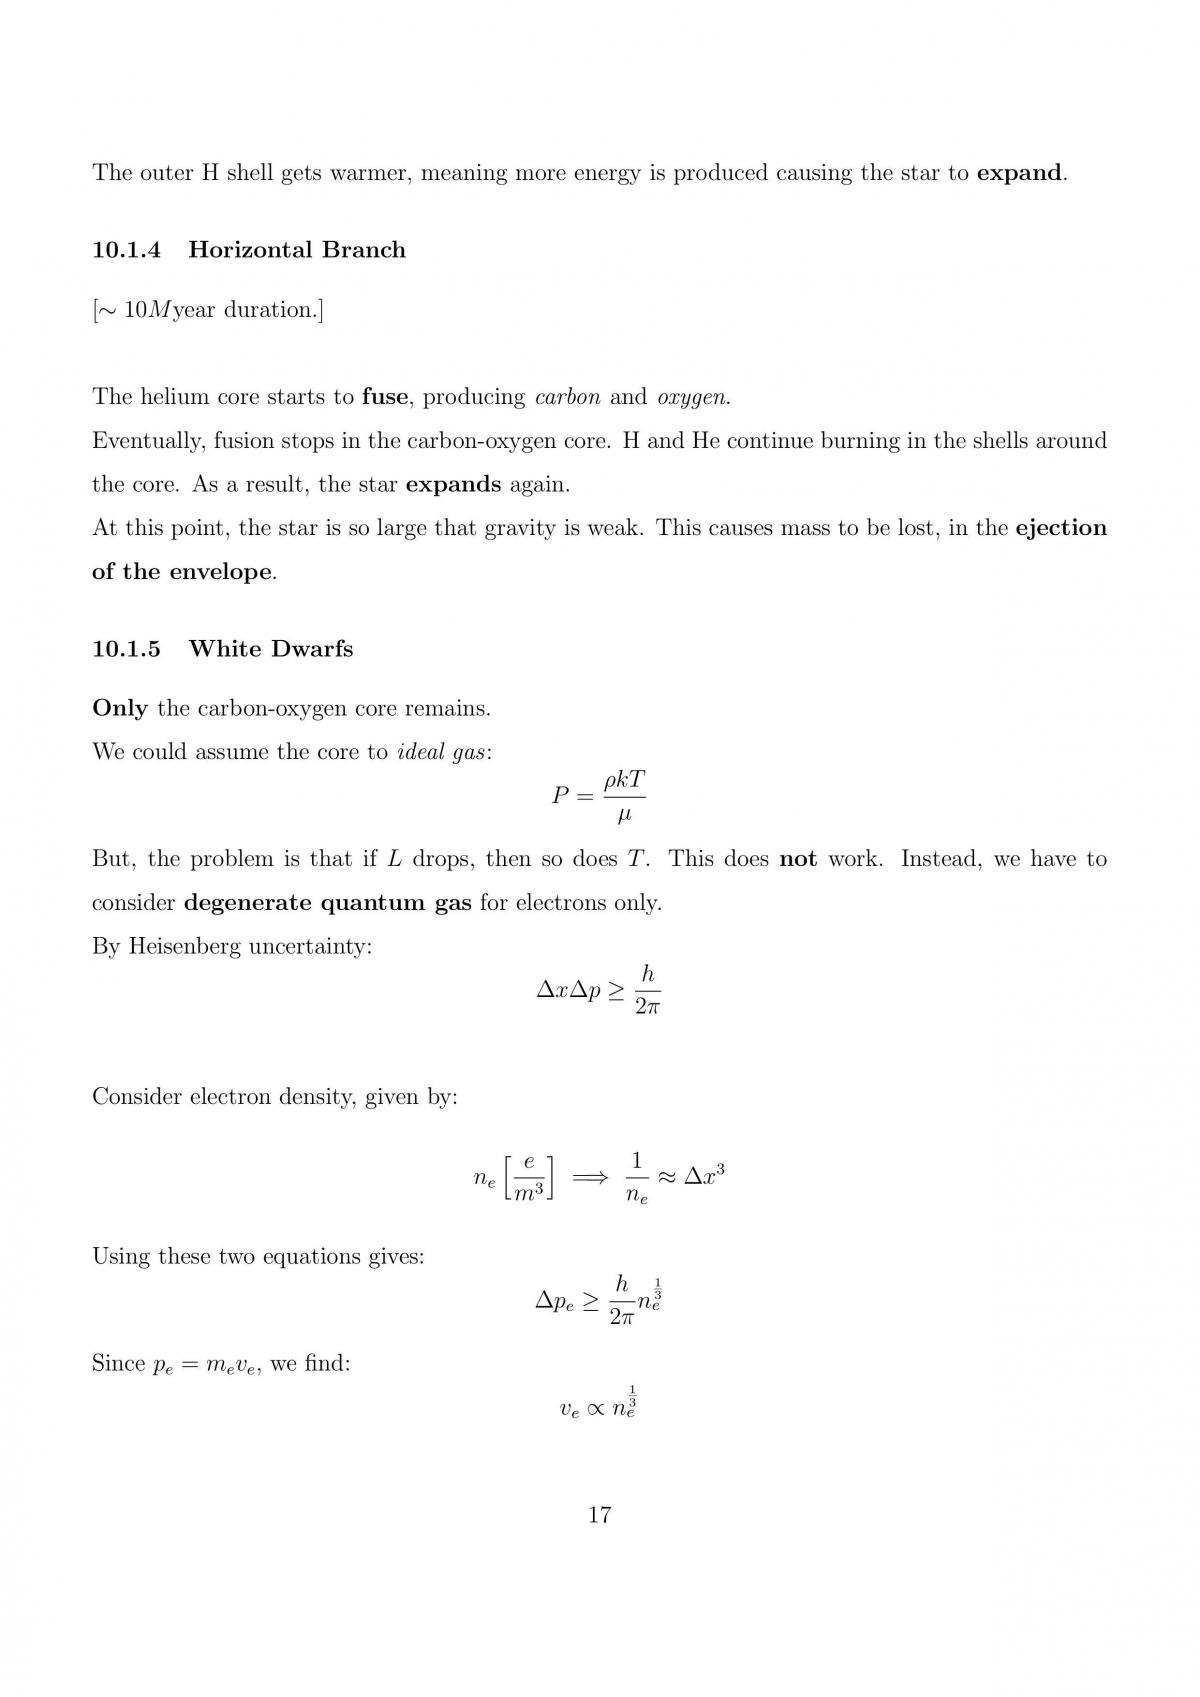 Astronomy Notes - Page 17